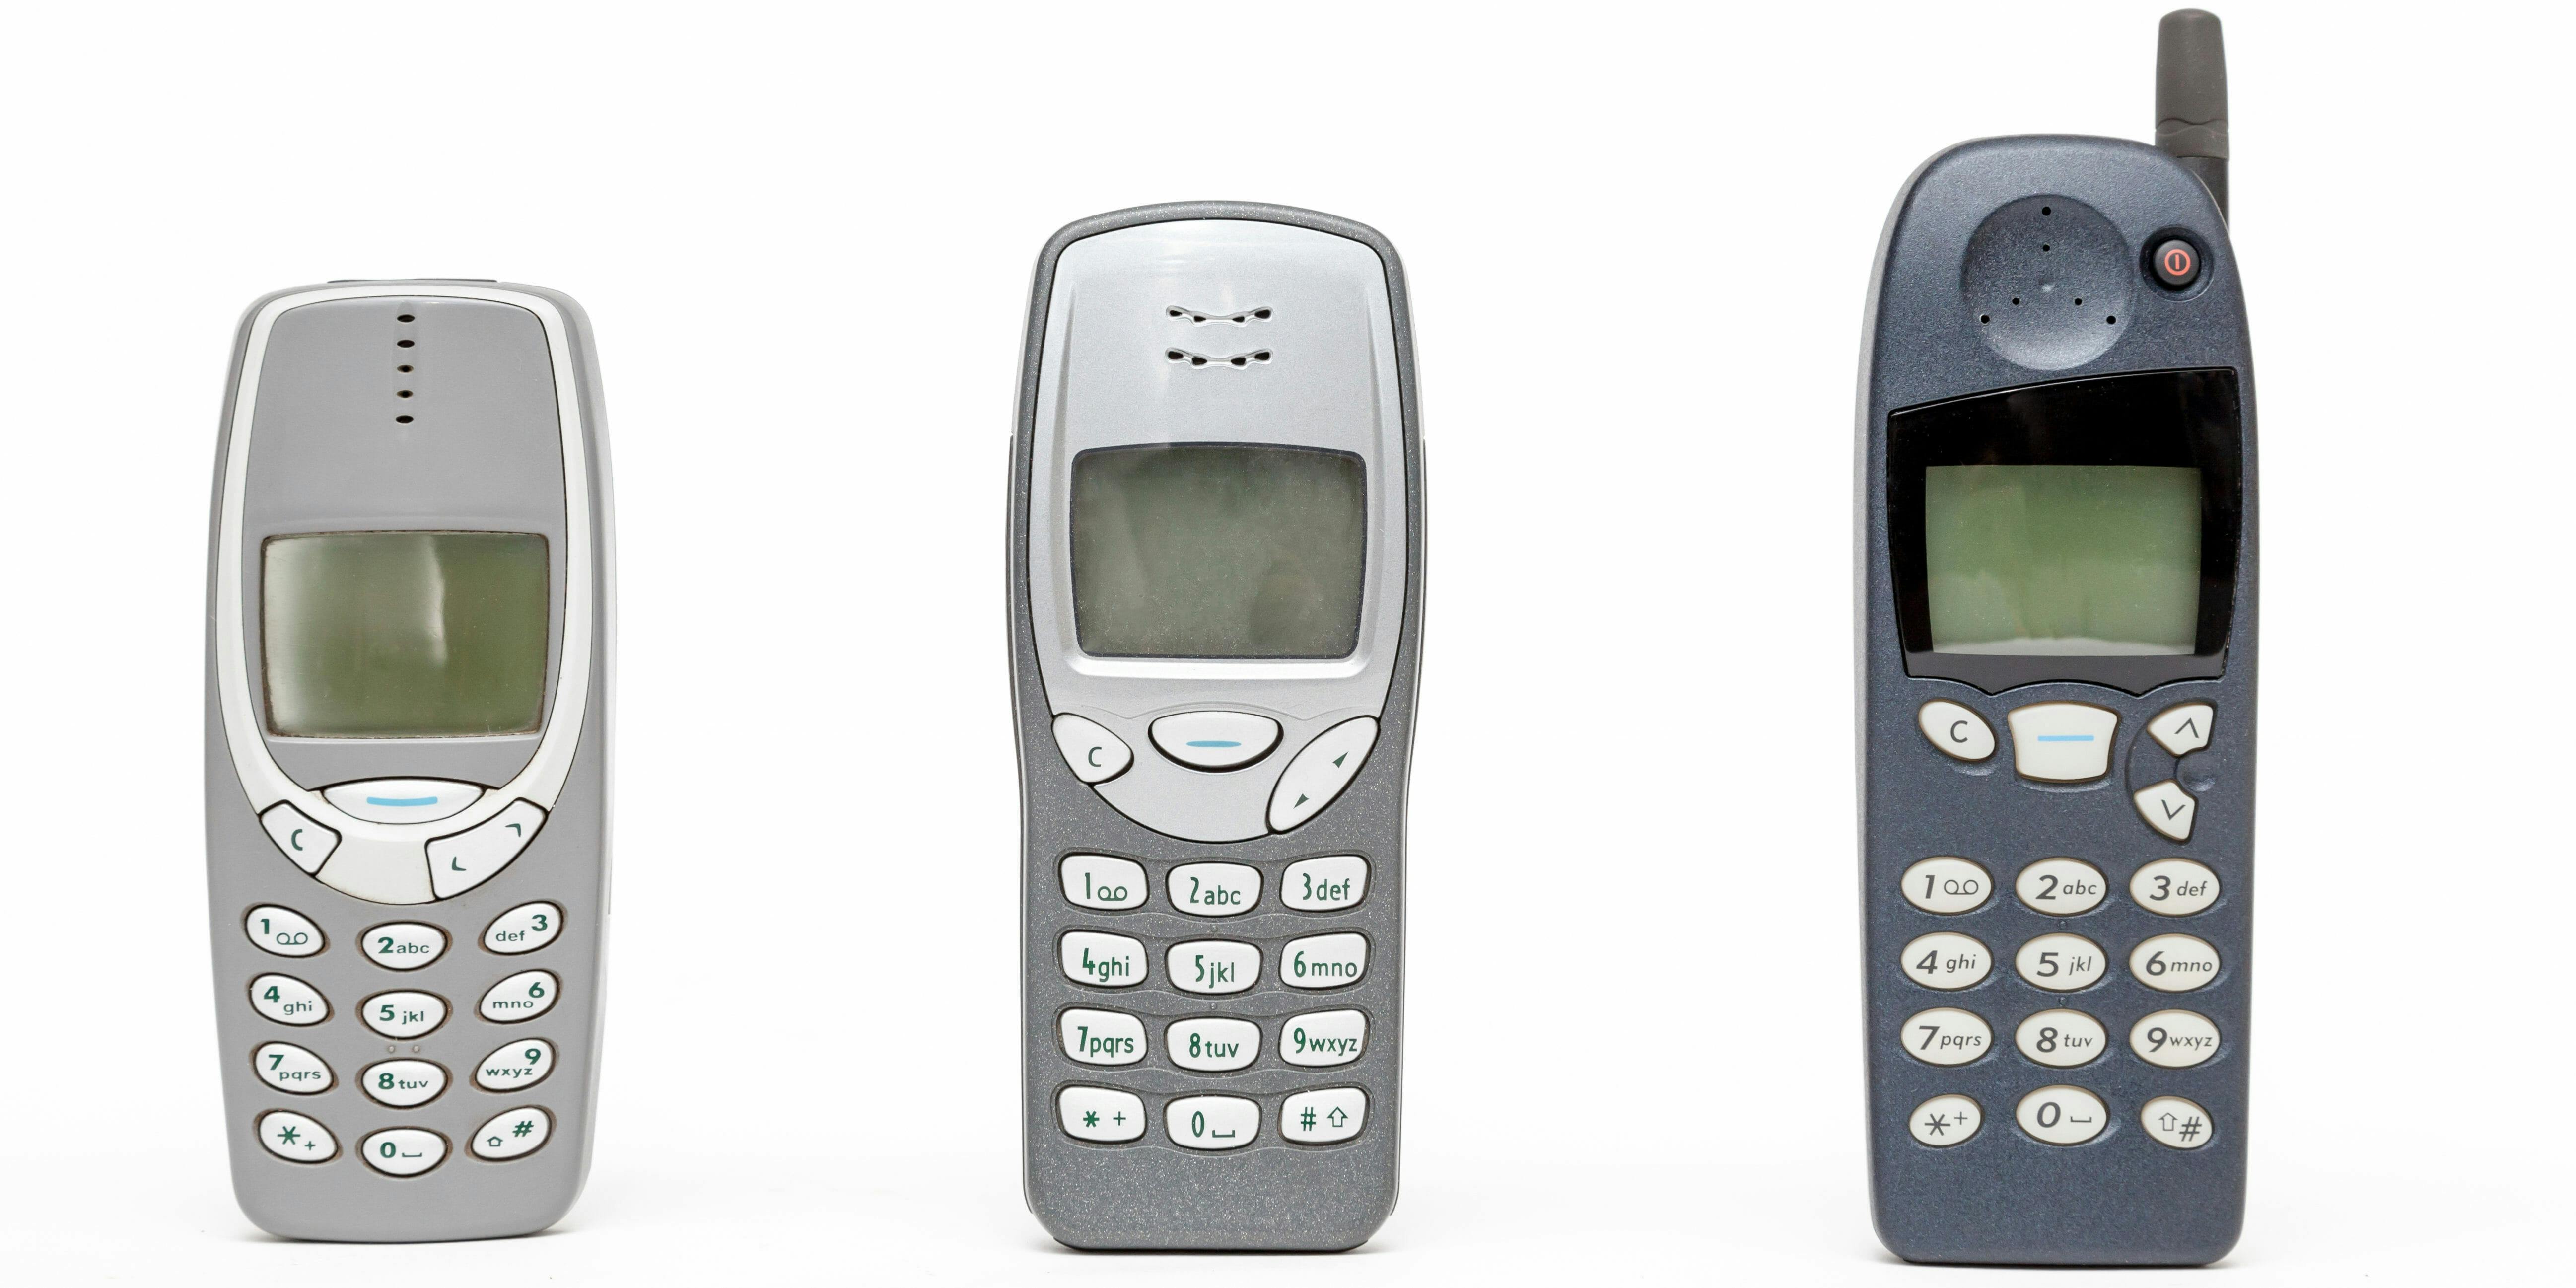 Was the Nokia 3210 the greatest phone of all time?, Nokia